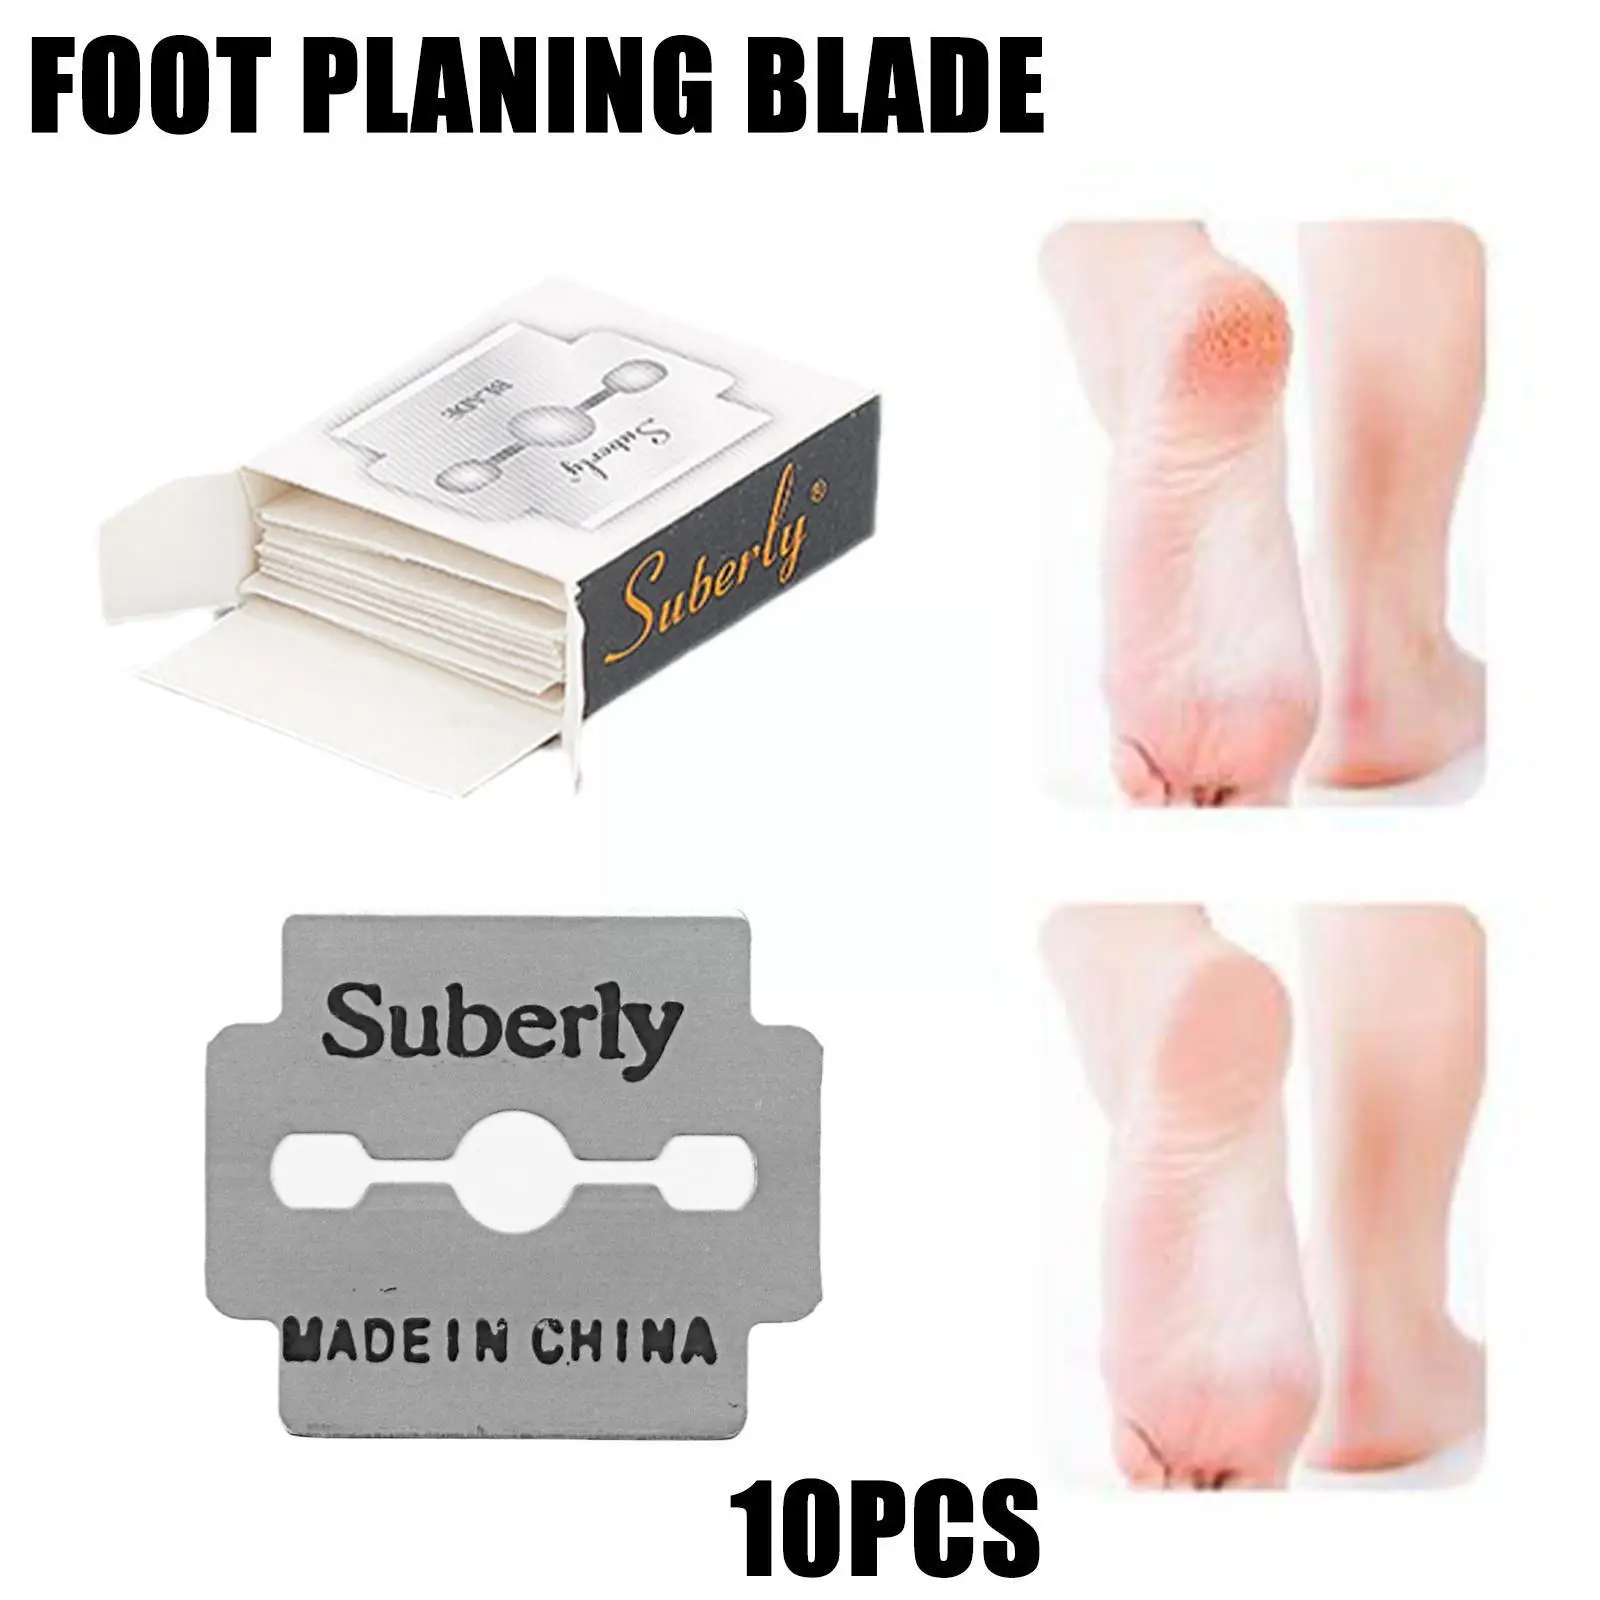 

1 Box/10pcs Foot Planer Special For Pedicure Leather Foot Sharpener For Removing Dead Skin And Calluses Pedicure Blad J0E3